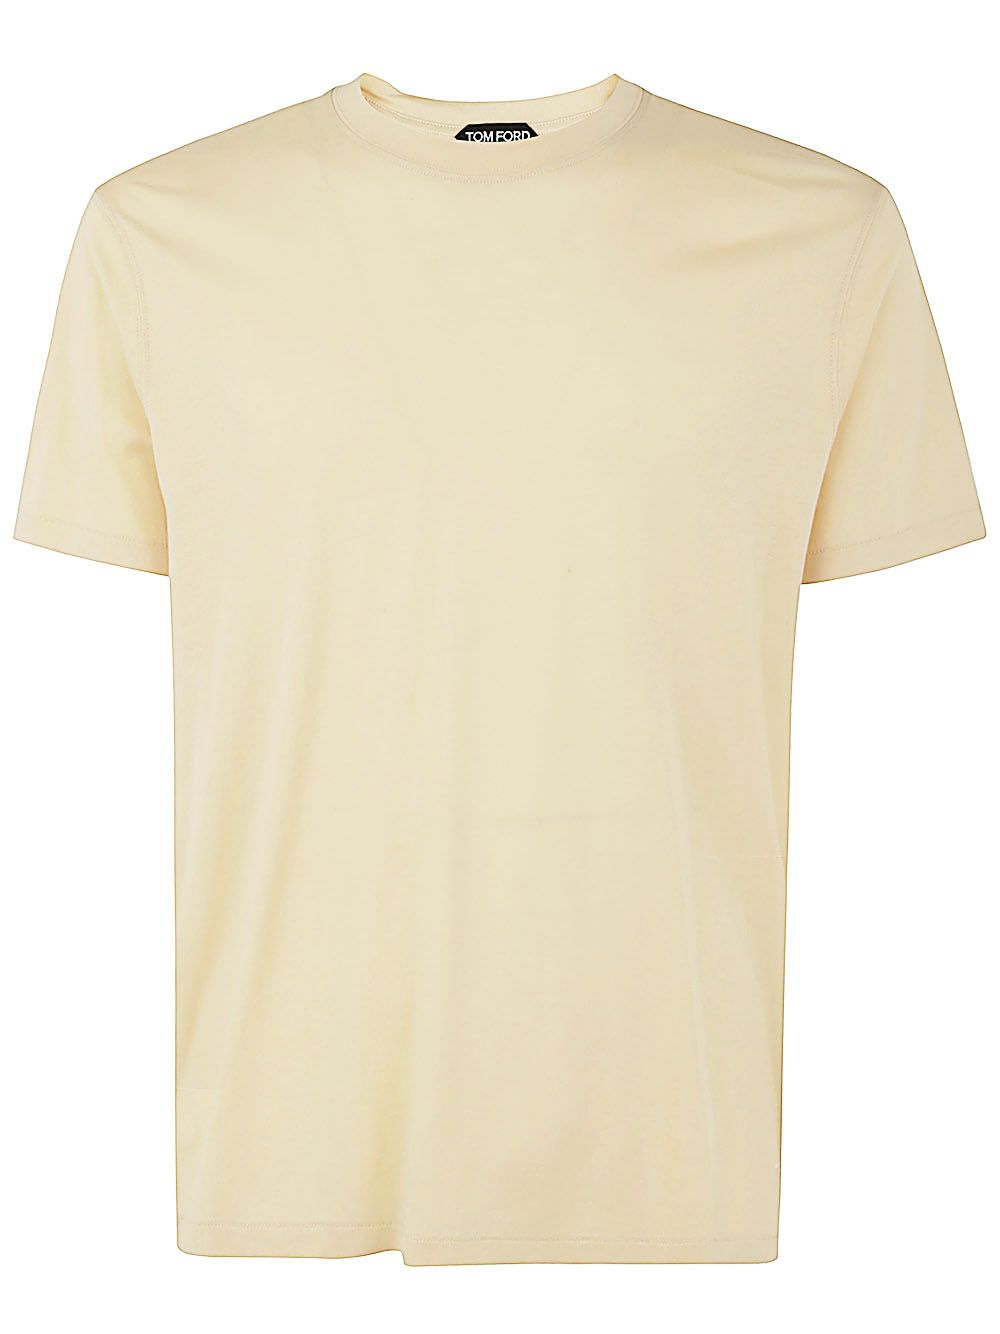 TOM FORD CUT AND SEWN CREW NECK T